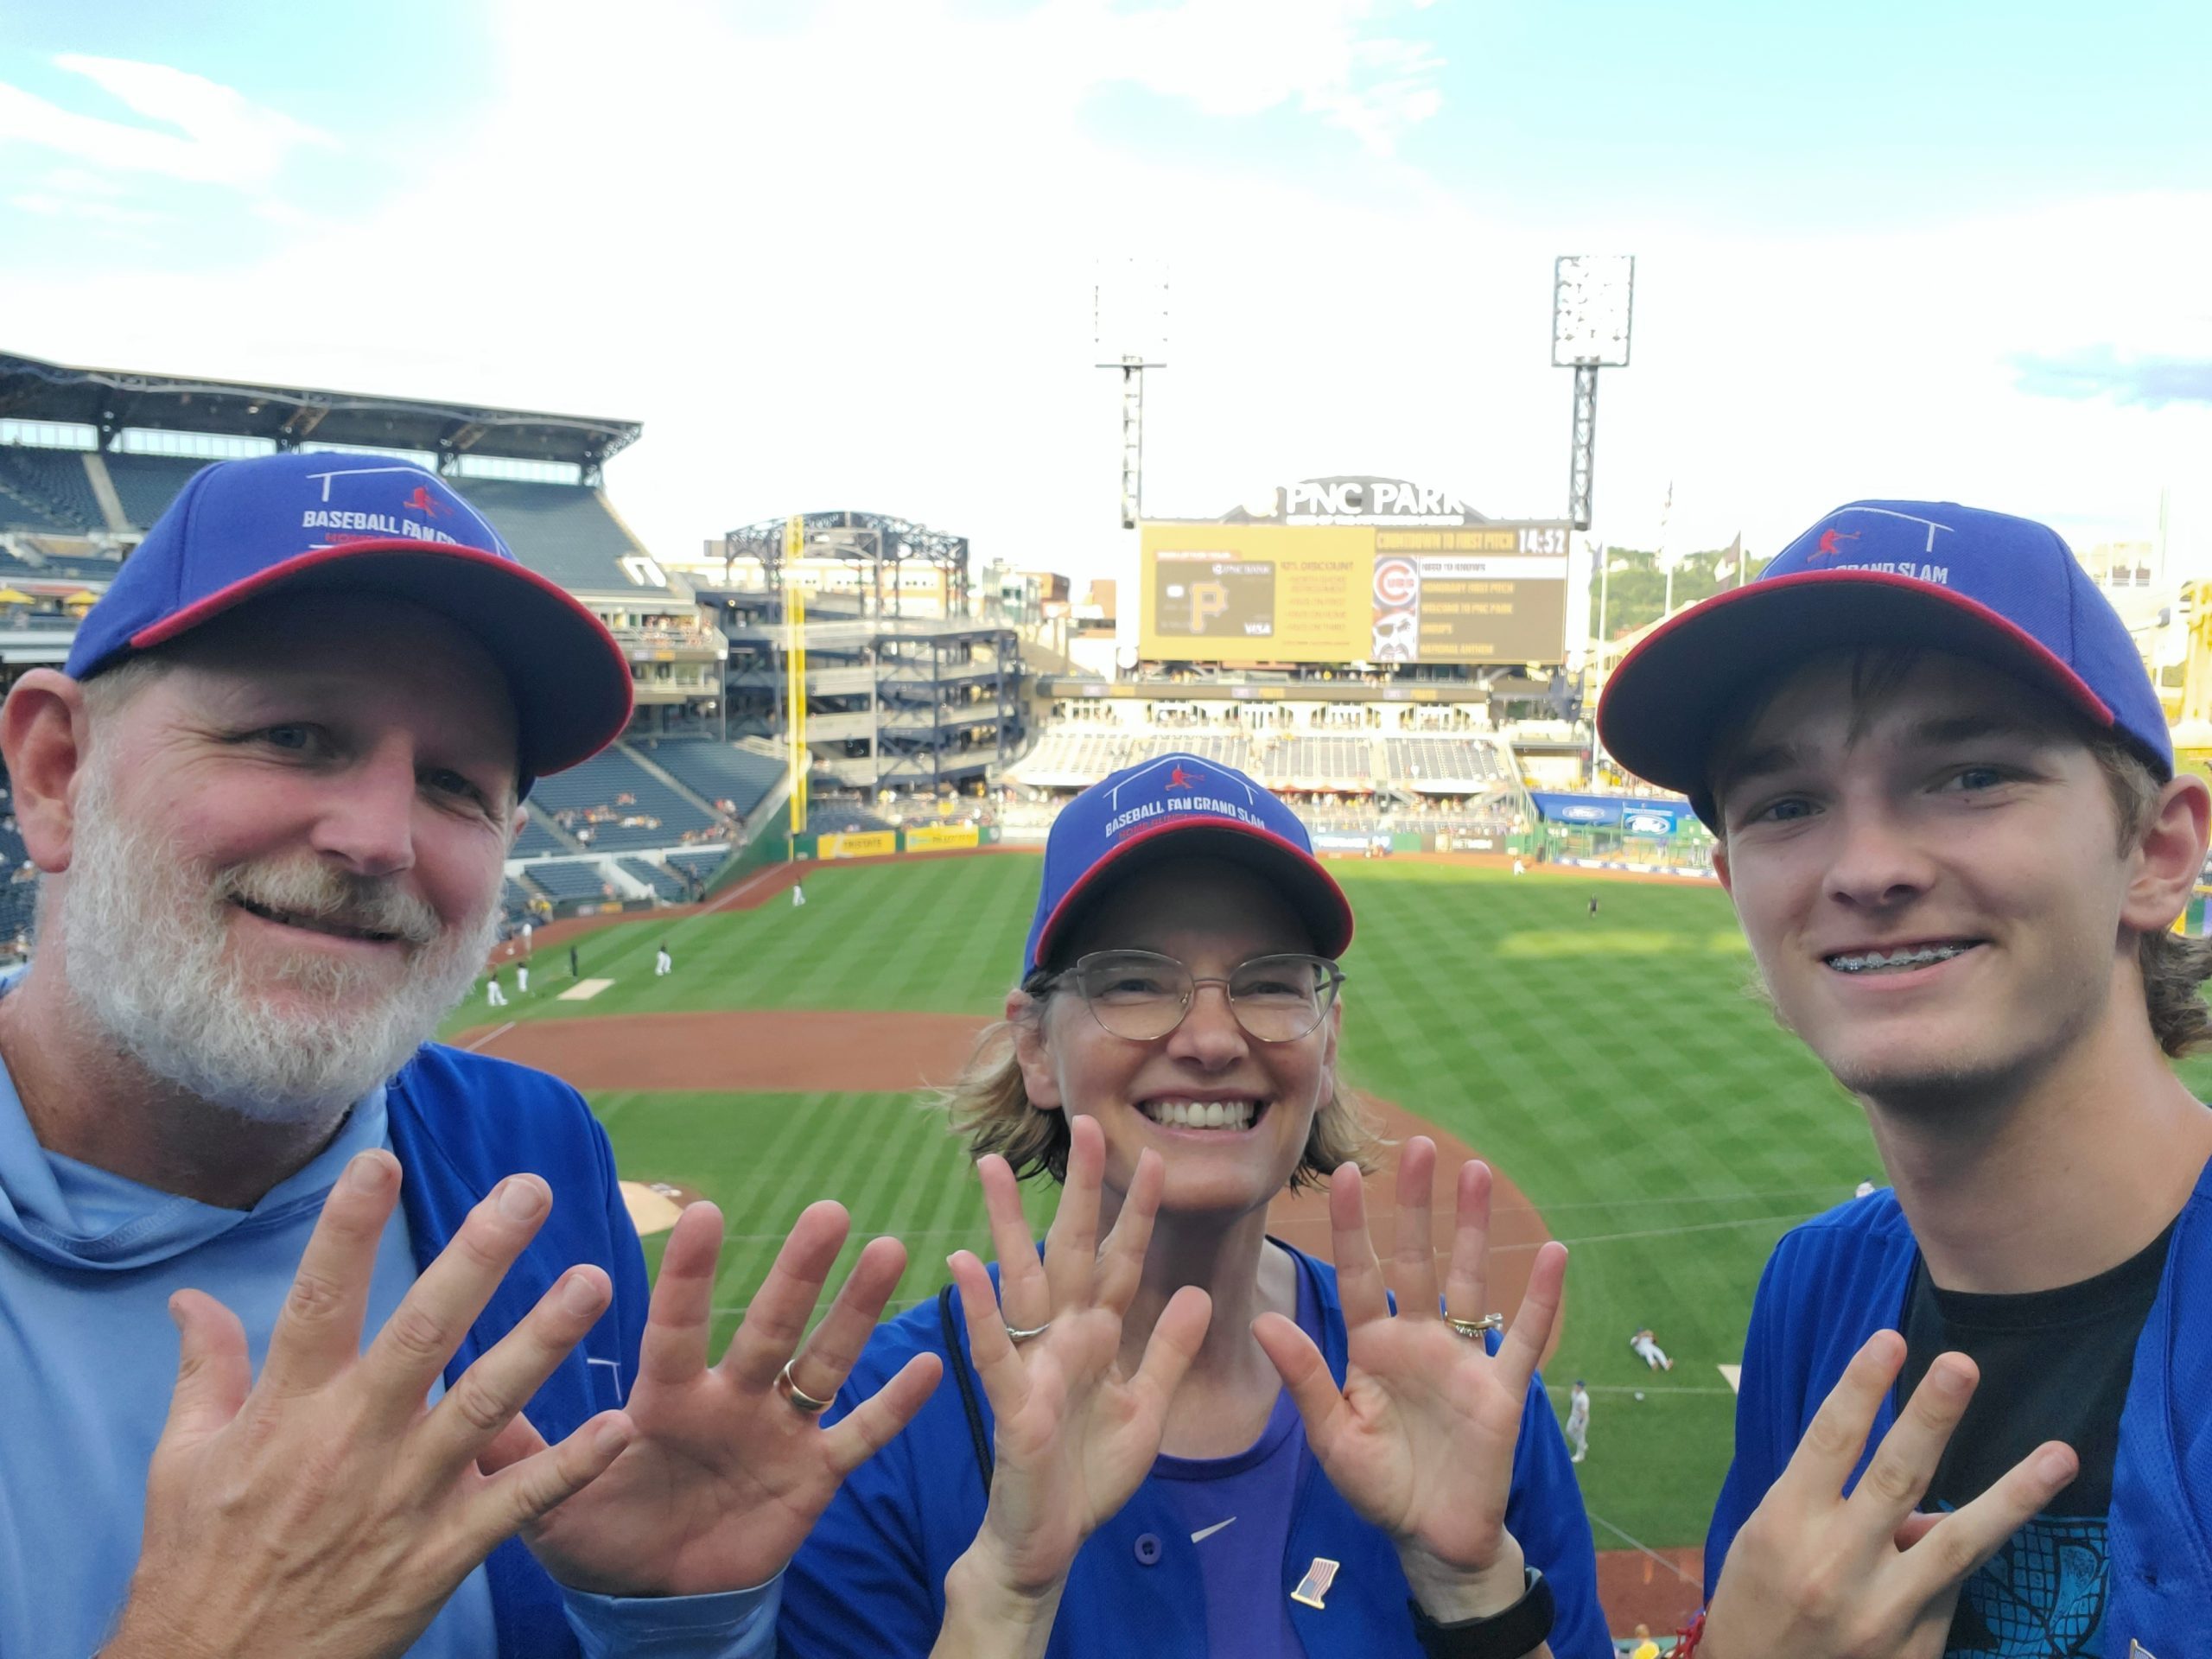 Heather, Brad and Ryan at PNC Park